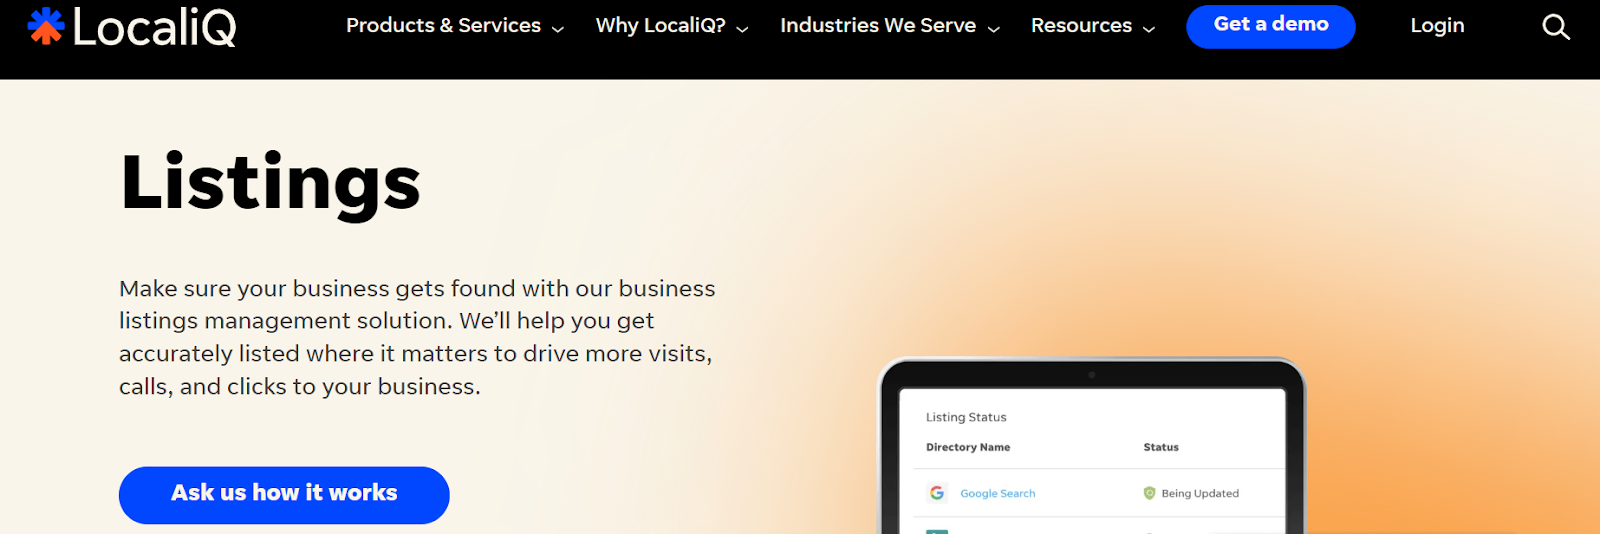 LocaliQ listed as one of the best SEO companies for Home Services